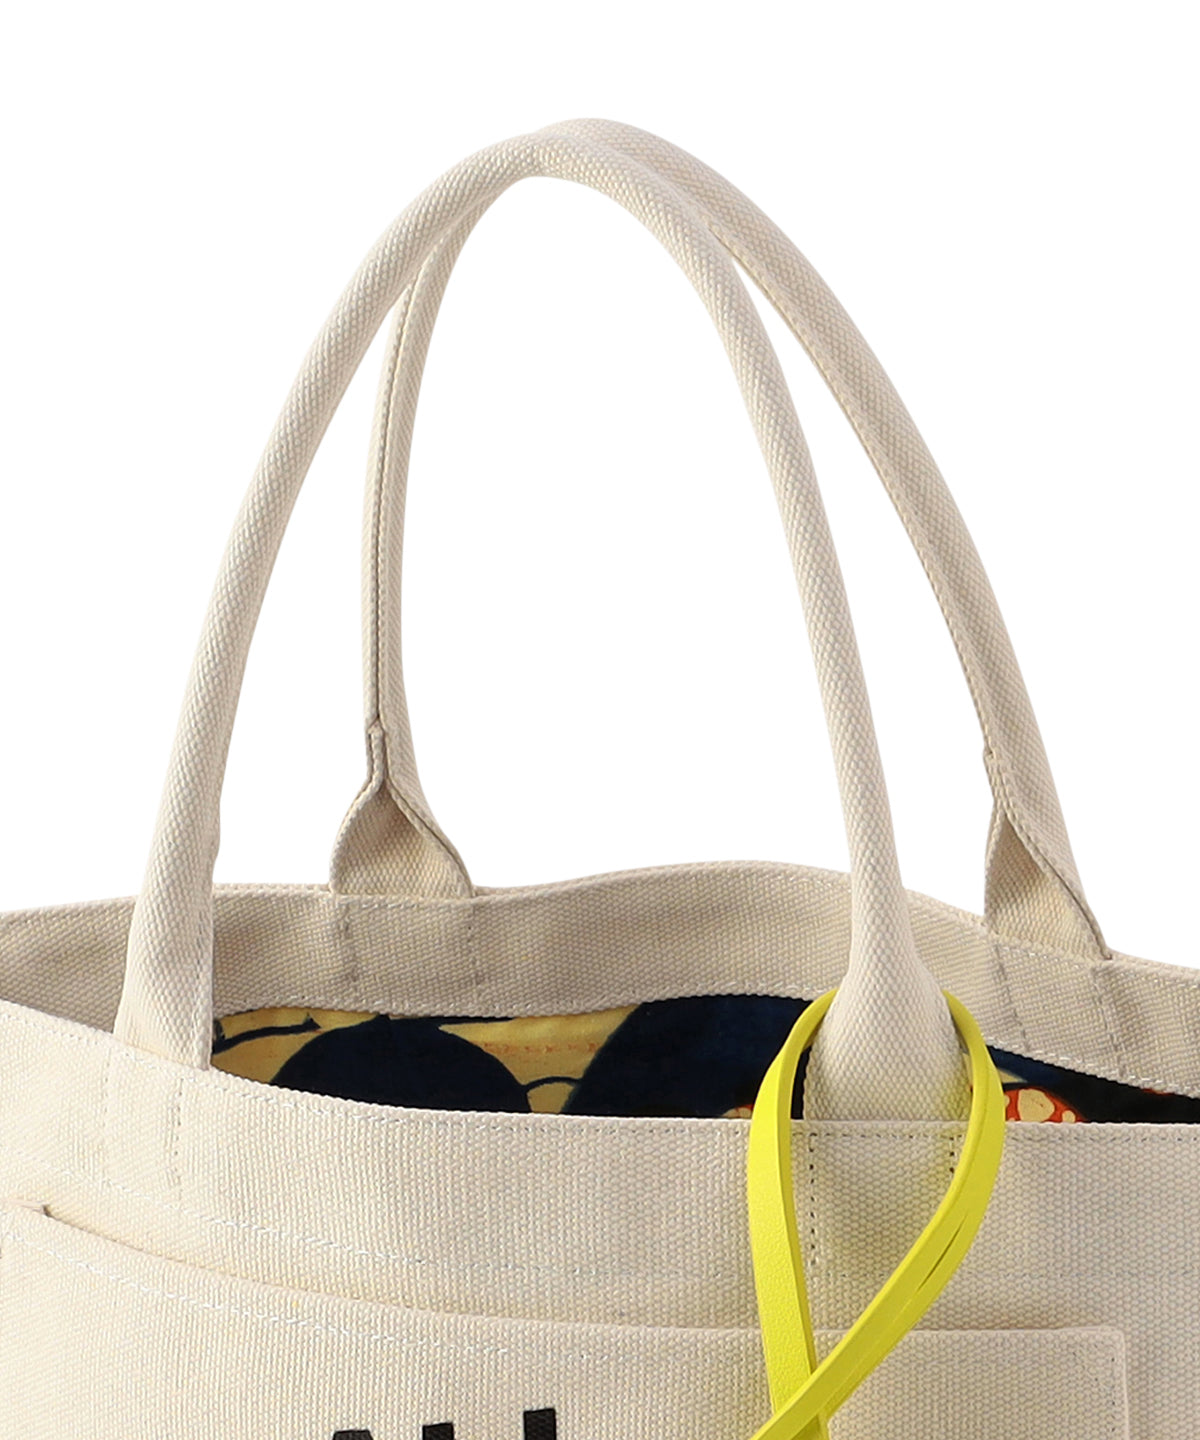 Recycled Canvas Tote Bag(Medium) NATURAL | バッグ | CLOUDY公式通販 